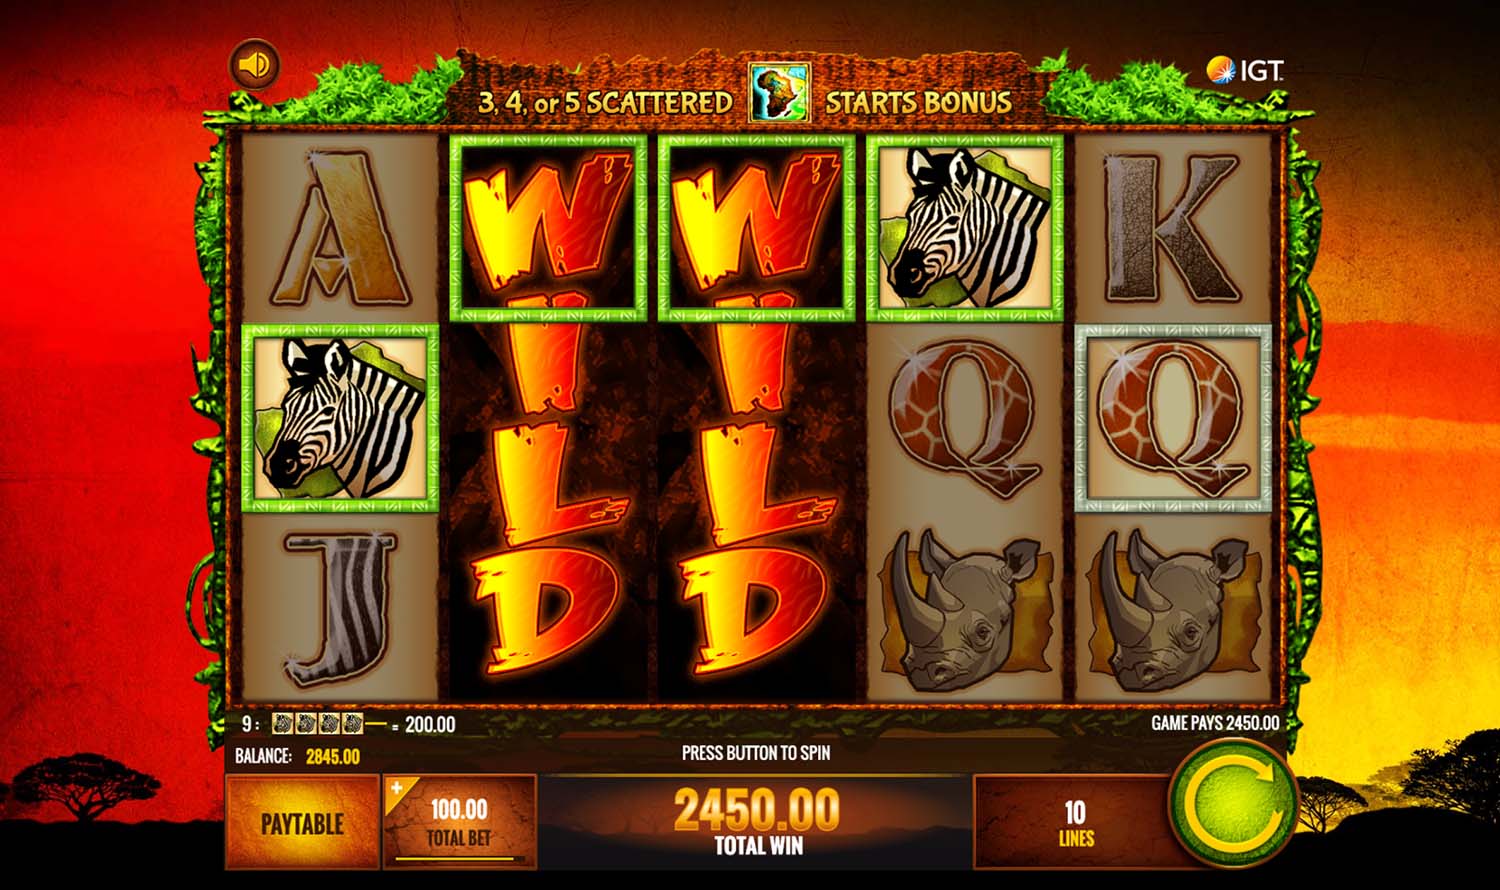 Exciting Slot Machine Interface in Action!